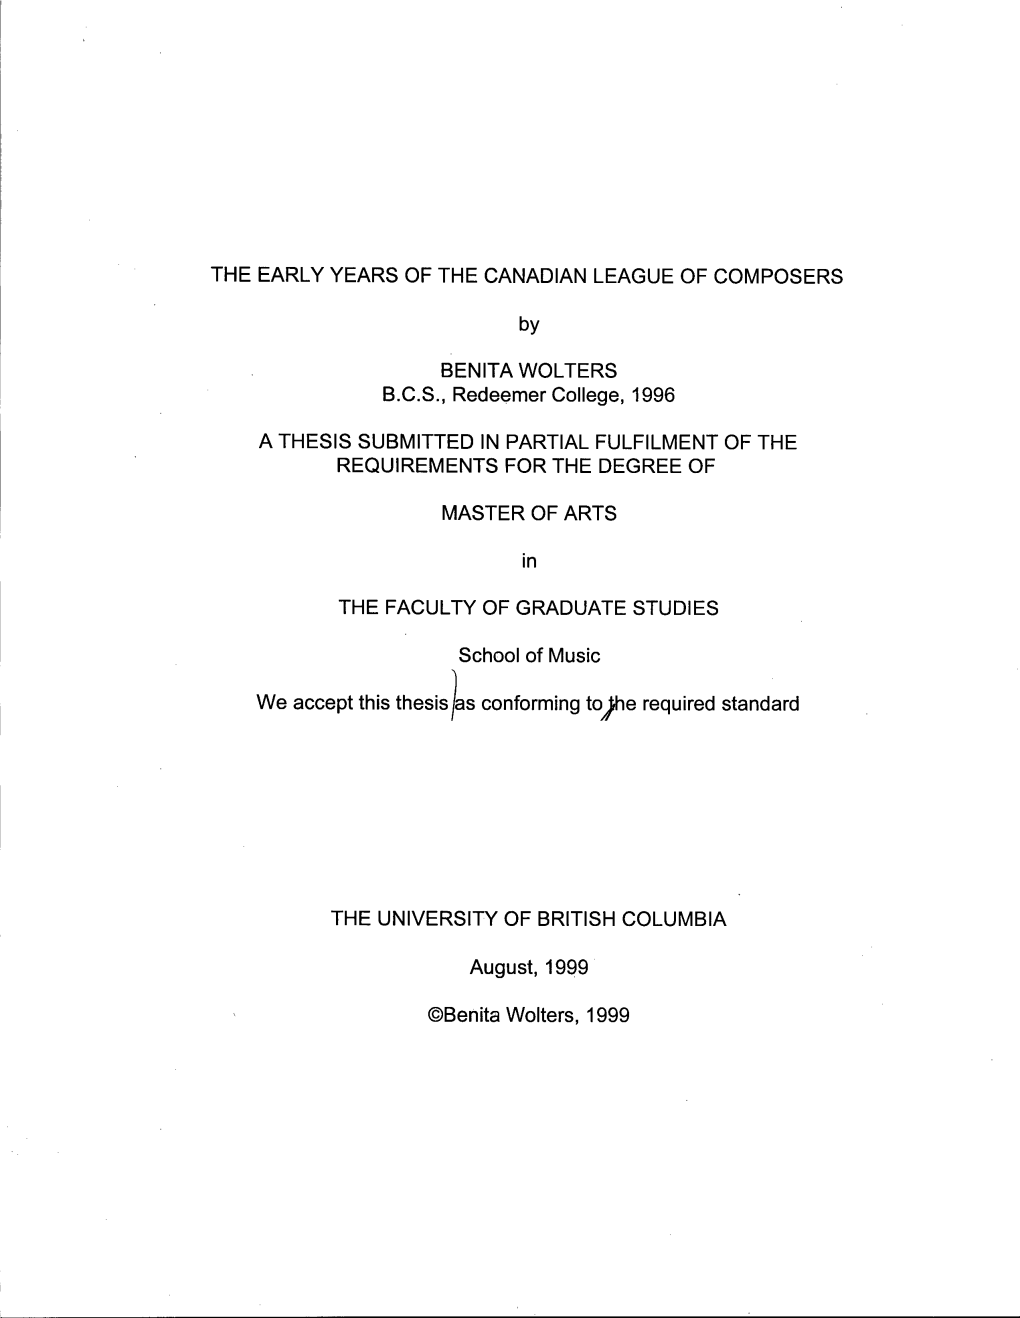 THE EARLY YEARS of the CANADIAN LEAGUE of COMPOSERS BENITA WOLTERS B.C.S., Redeemer College, 1996 a THESIS SUBMITTED in PARTIAL